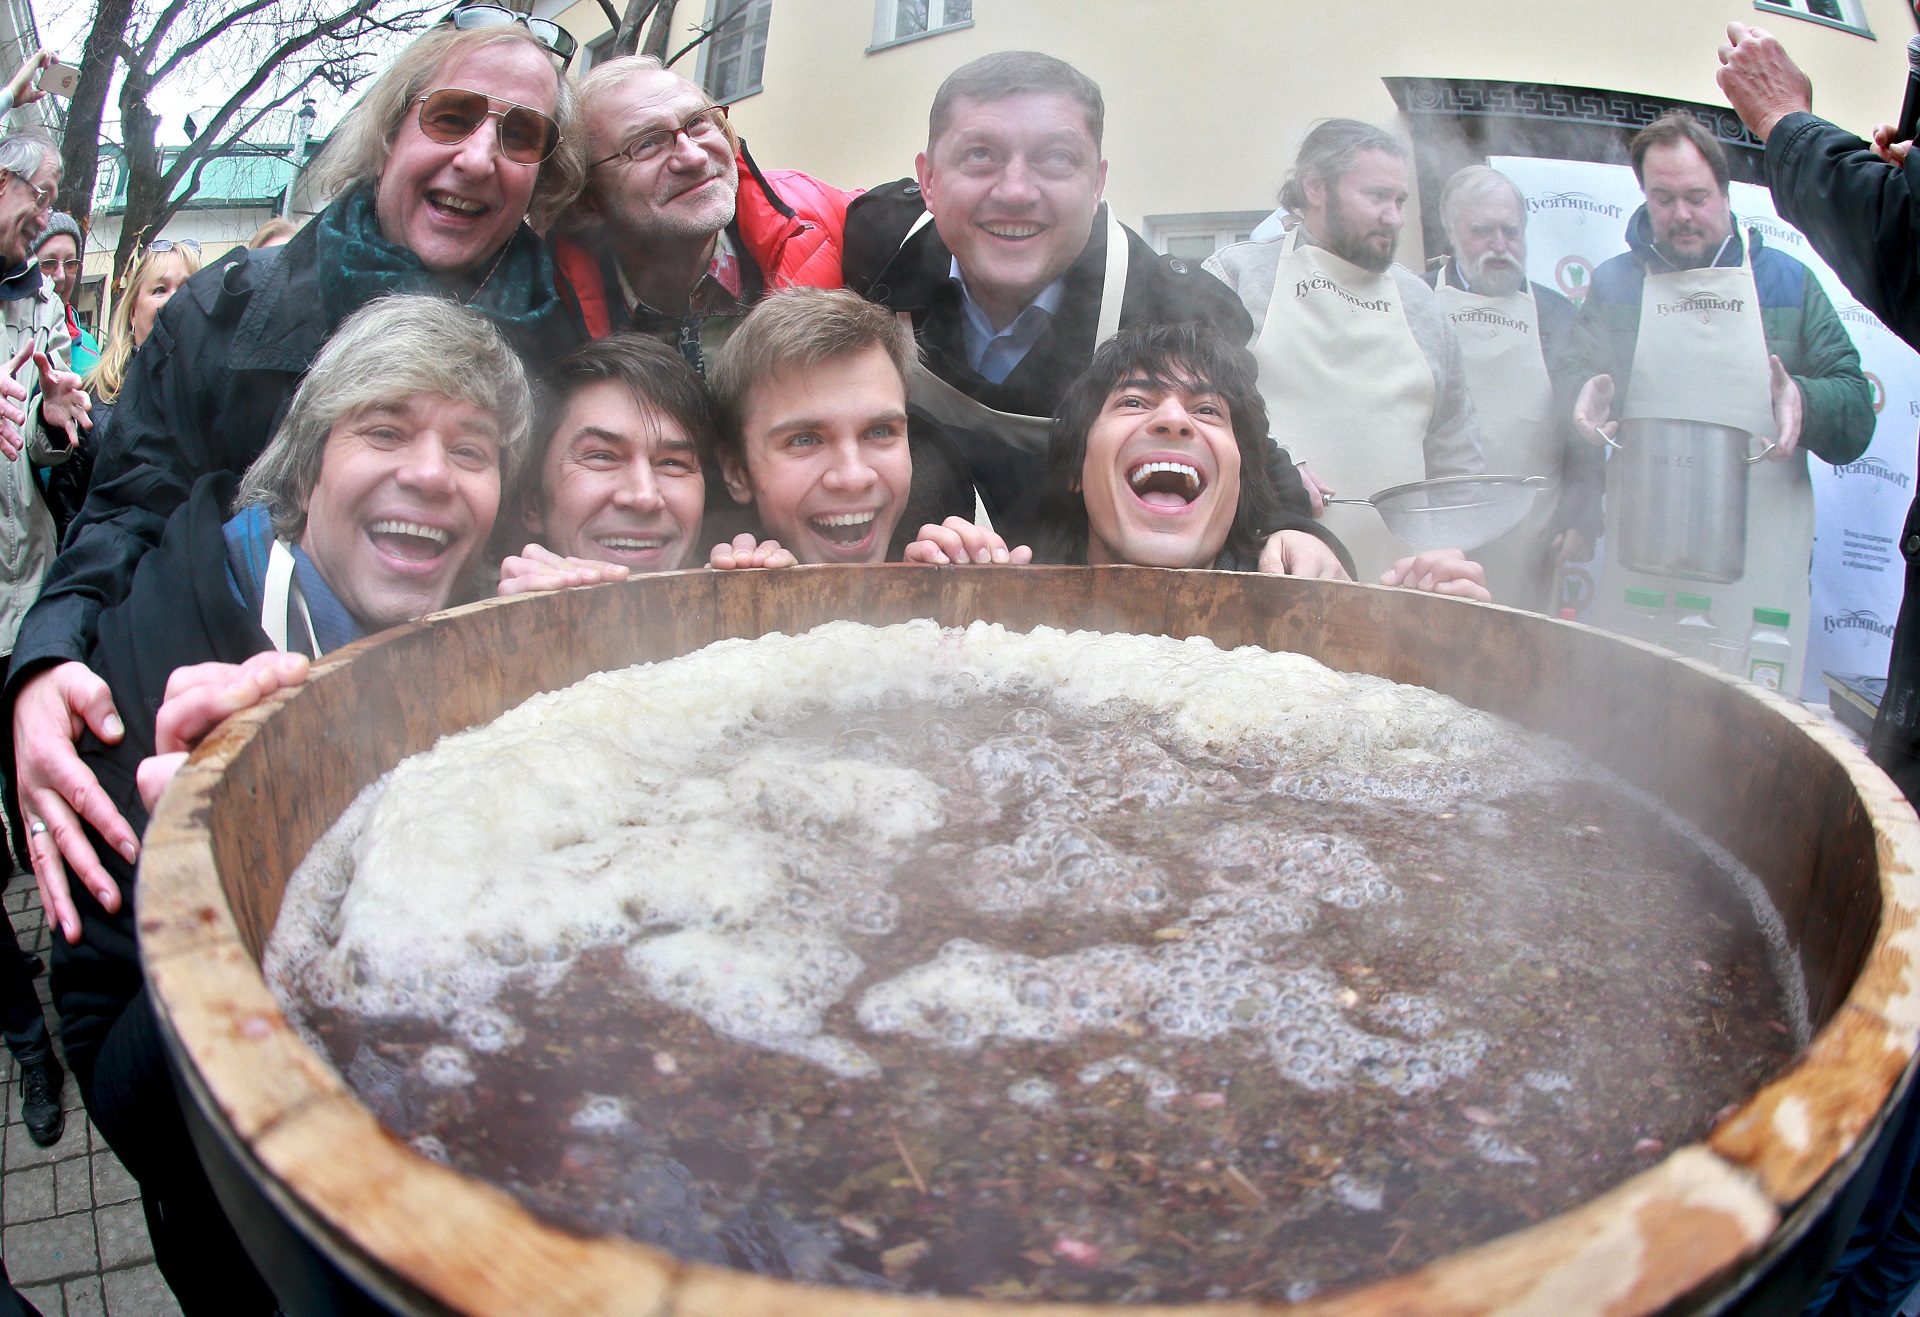 2805989 03/13/2016 First row, from left: Na-Na band members Slava Zherebkin, Vladimir Politov and Mikhail Semidyanov, with director Andrei Zhitinkin, second row left, during the event entitled 'Maslenitsa in Guinness World Records'. A giant portion of honey sbiten, an ancient Russian hot drink, was cooked in downtown Moscow. Anton Denisov/Sputnik